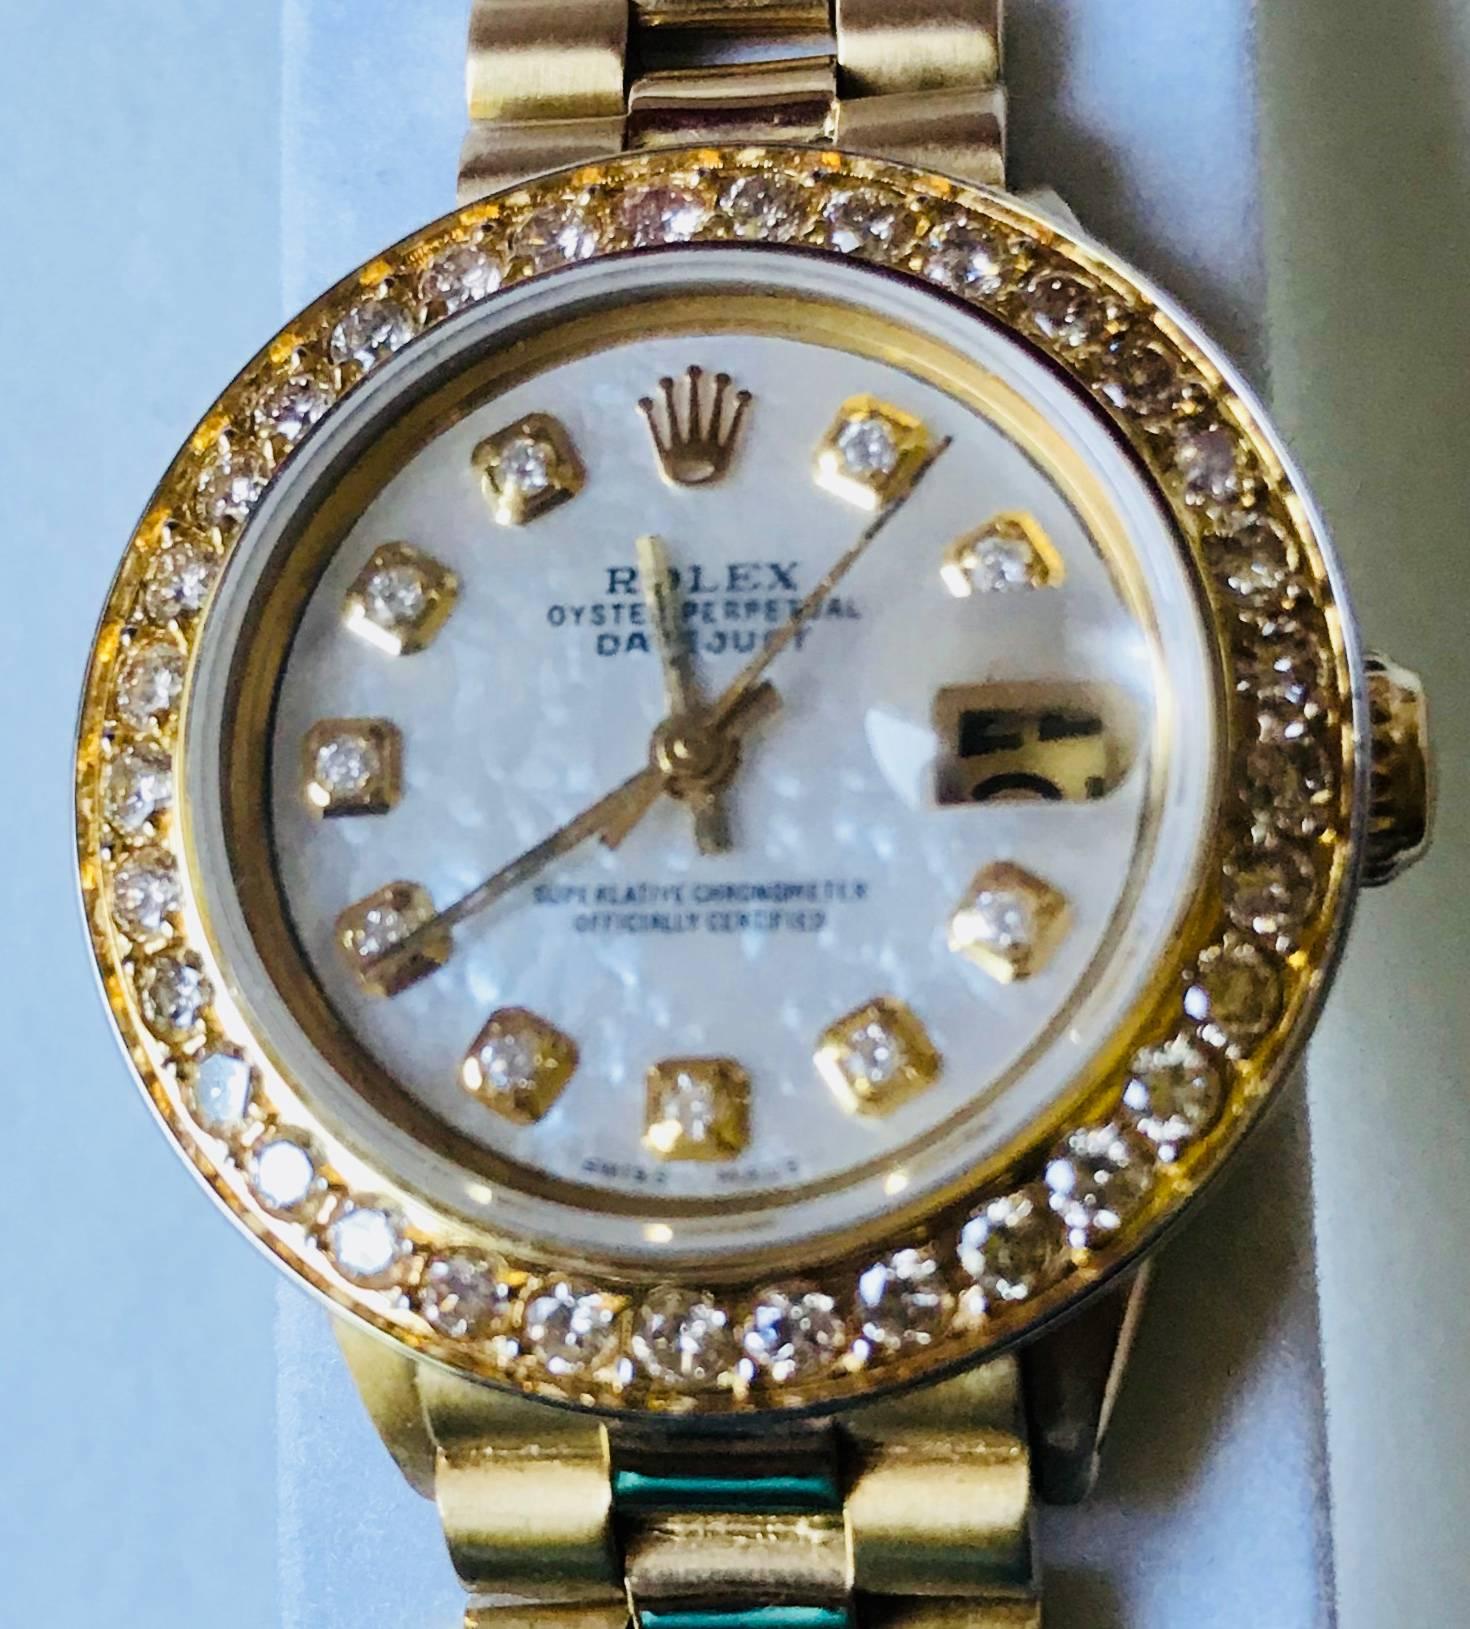 MATERIAL
18 ct yellow gold Mint condition as good as brand new 
Oyster, 31 mm, yellow gold and diamonds
DIAL
White mother-of-pearl set with diamonds
BRACELET
President, semi-circular three-piece link
GEM-SETTING
Diamonds in 18 ct gold Bezel